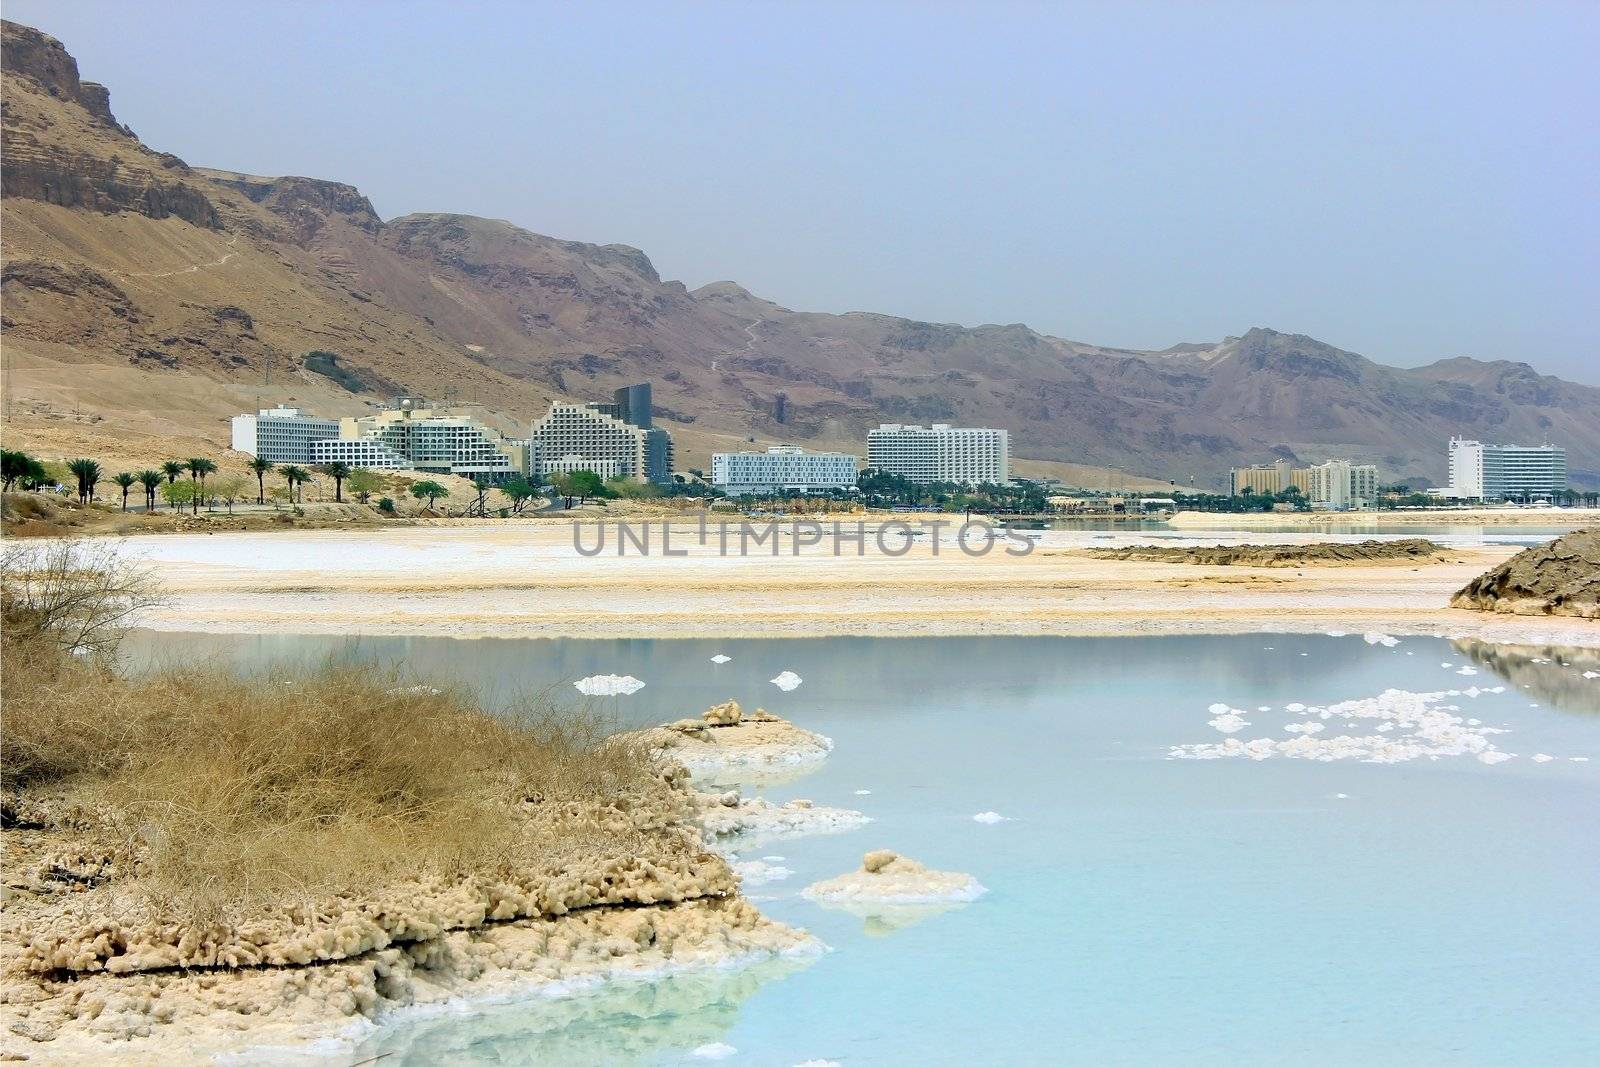 Landscapes of the Dead Sea by irisphoto4